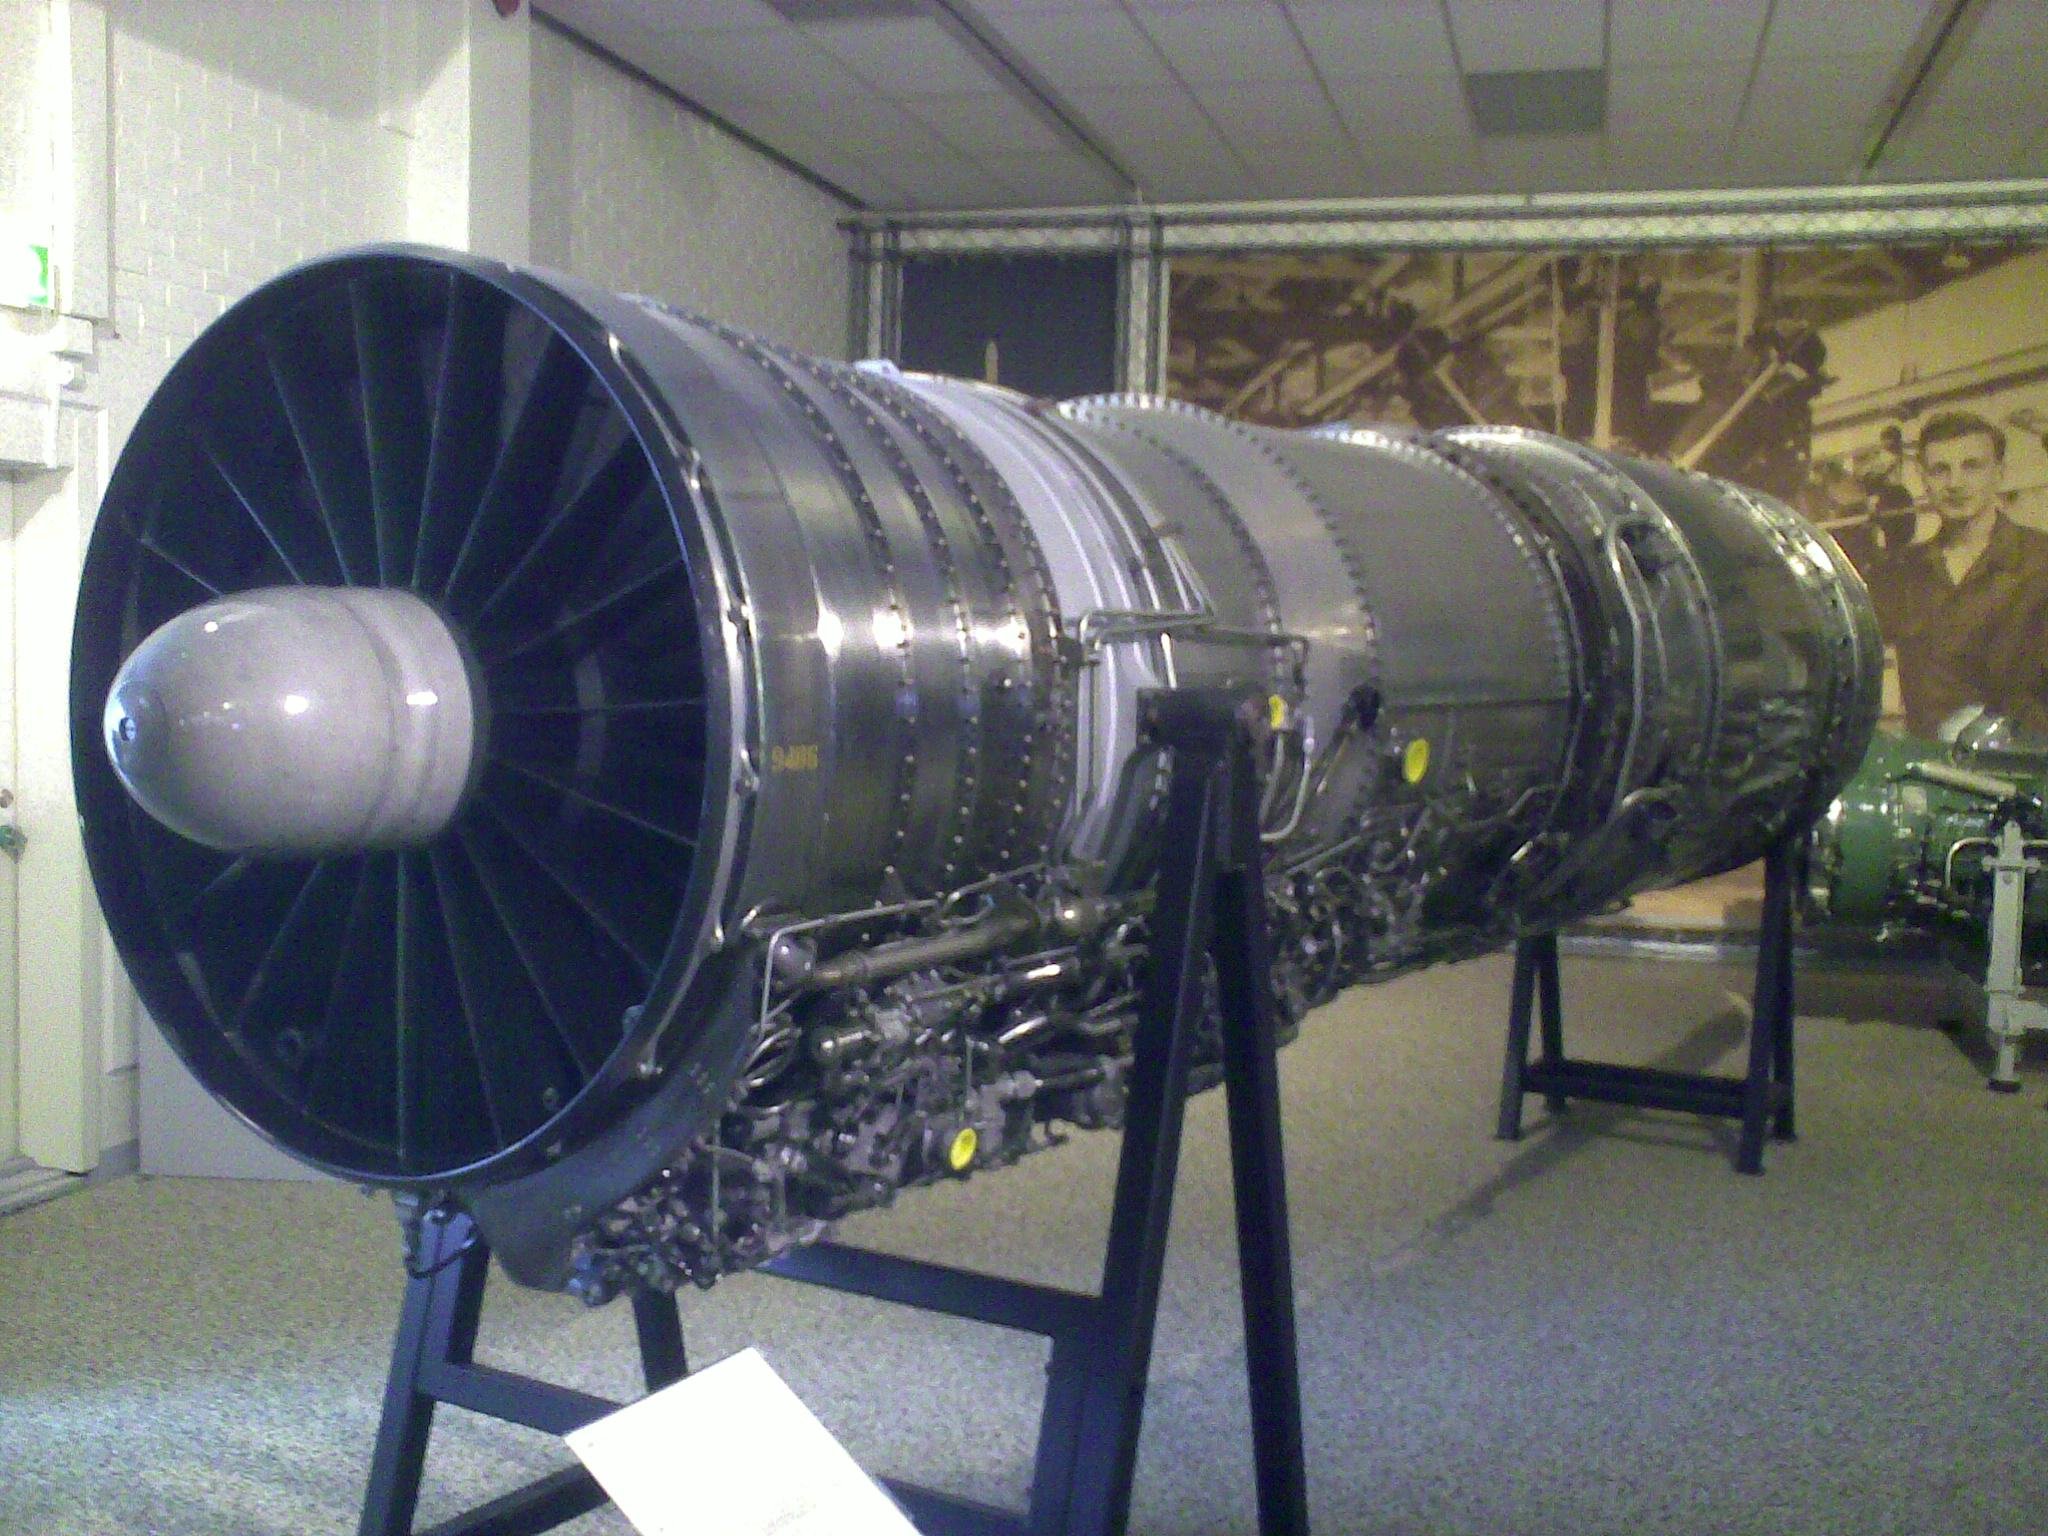 a large airplane engine is on display in a museum